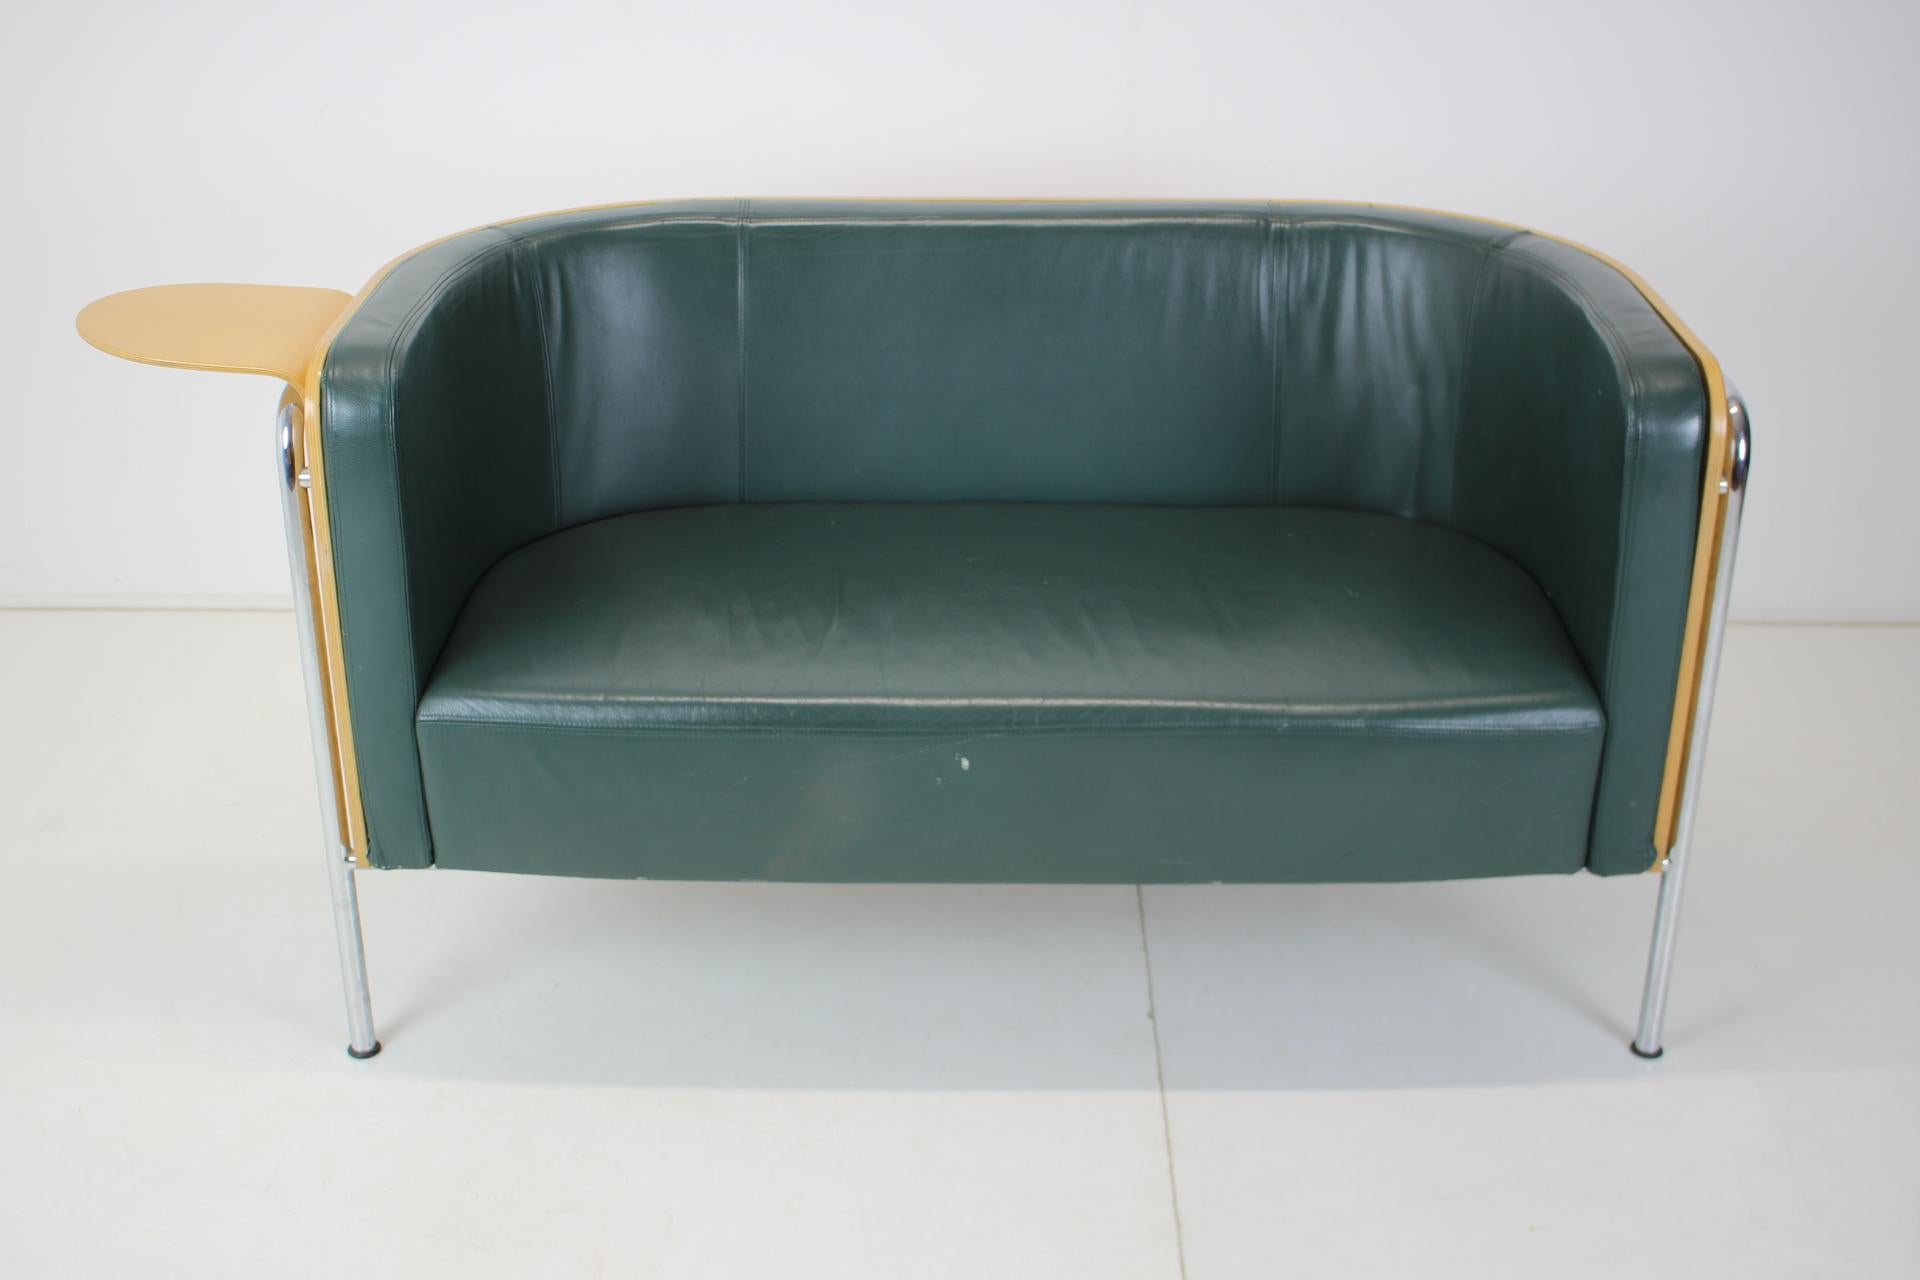 Mid-Century Modern Plywood and Leather Sofa by Christoph Zschocke for Thonet, 1990s / Germany